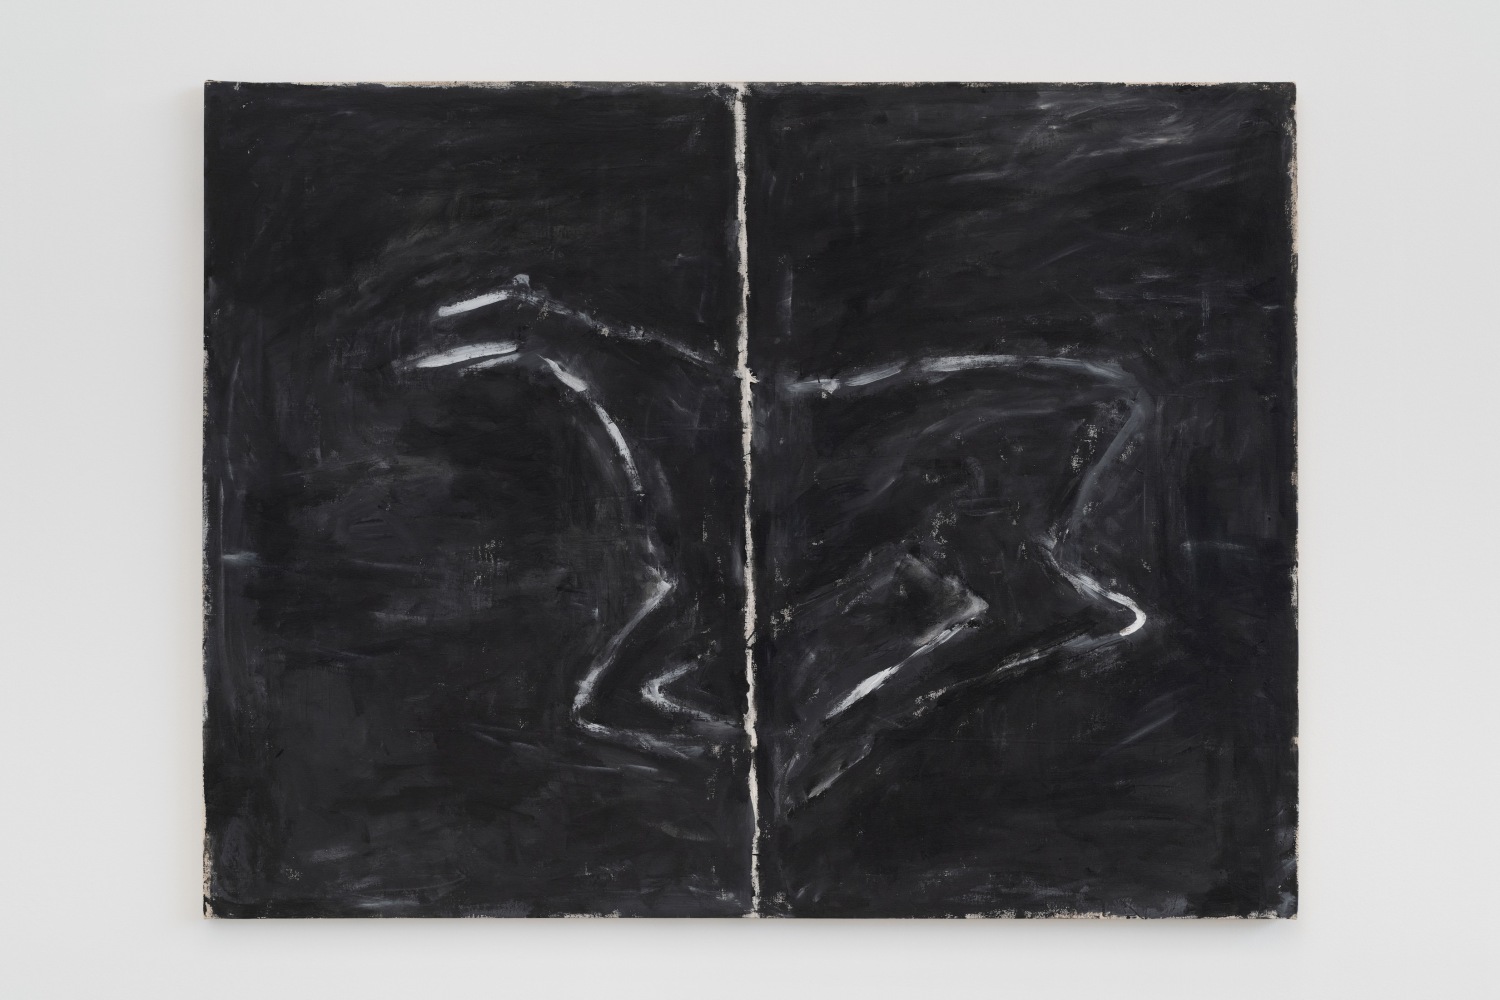 Scat, 1977
Acrylic and tempera on canvas
50 &amp;times; 65 inches
(127 &amp;times; 165.1 cm)
Private Collection, Seattle